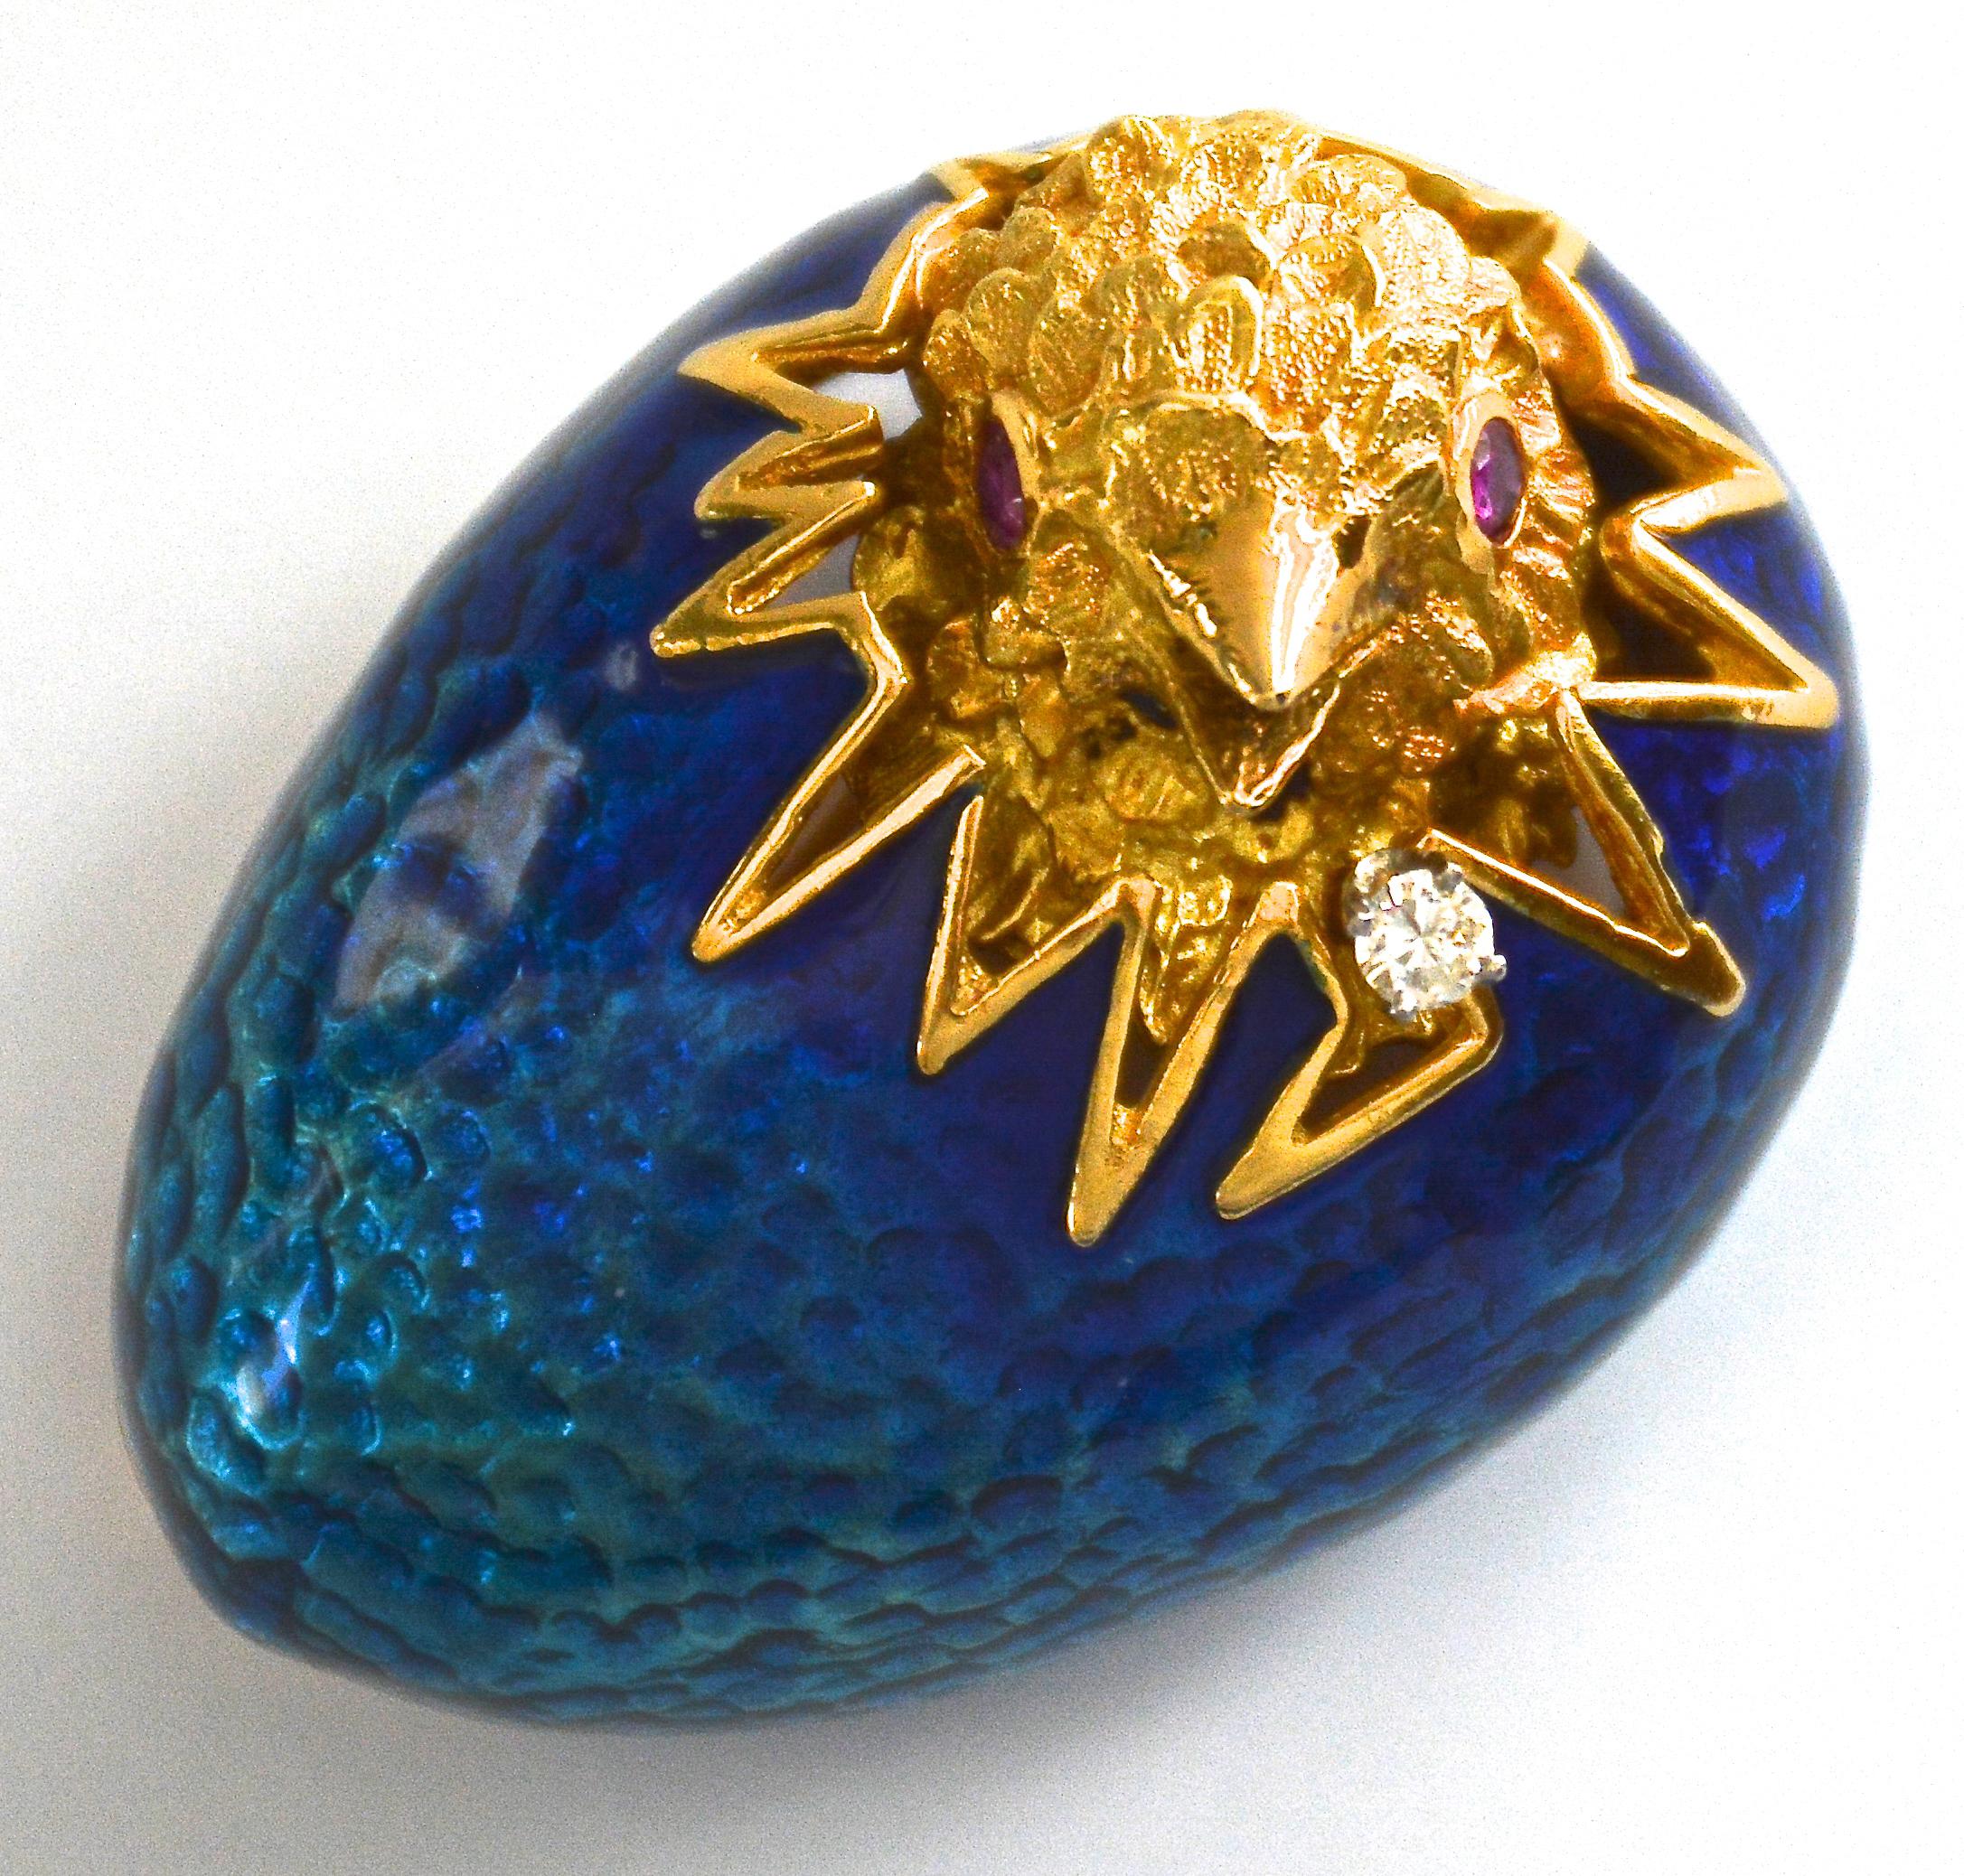 Blue Enameled 18k Egg Featuring a Hatching Chick with a Diamond and Ruby Eyes For Sale 2